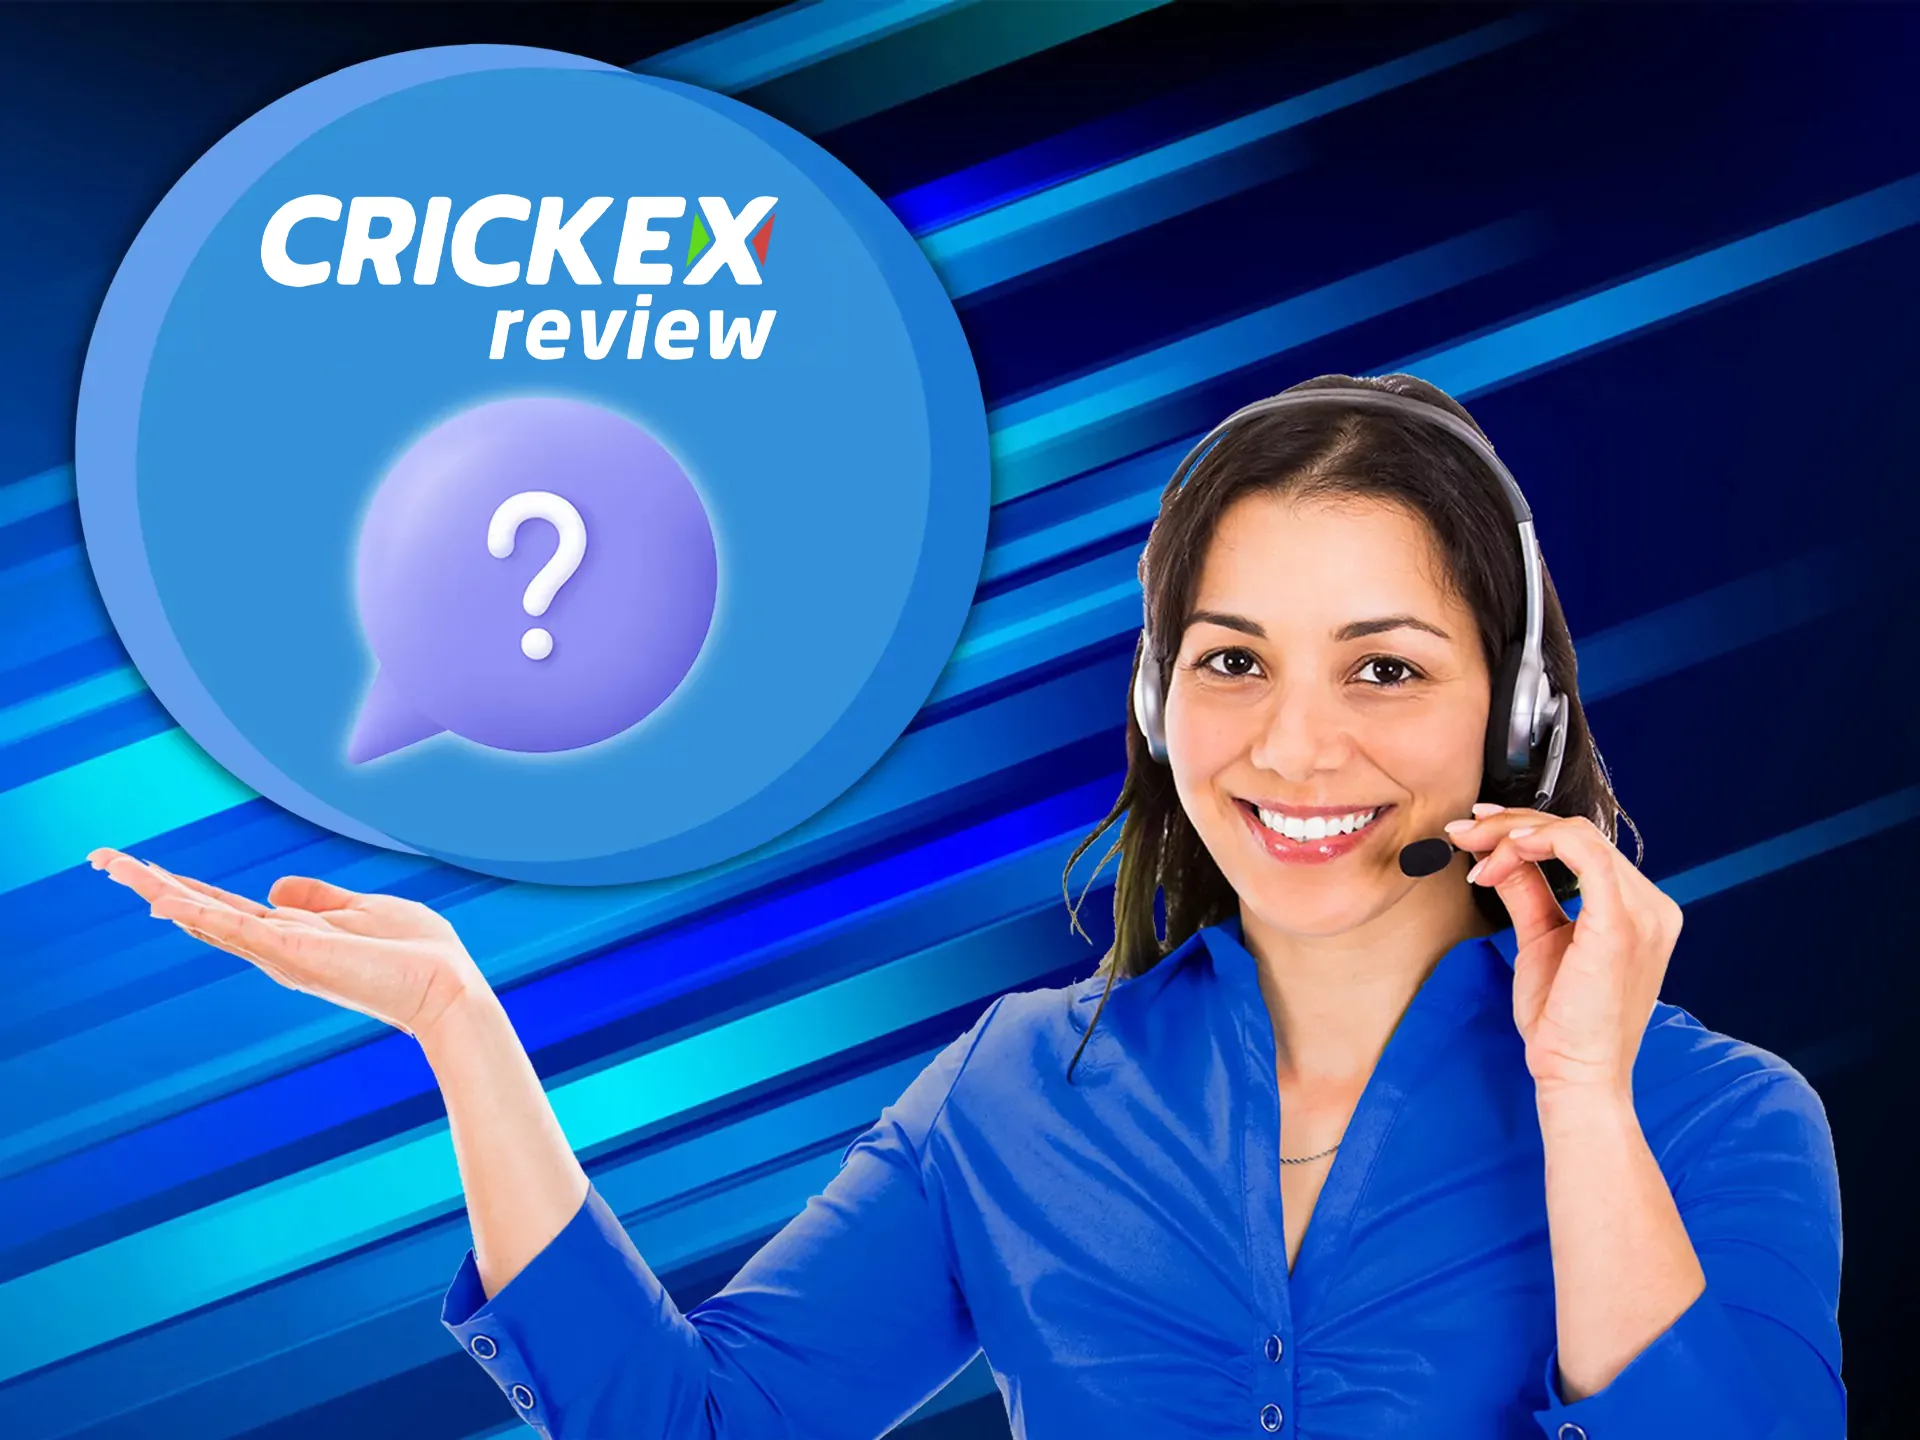 You can contact Crickex support different ways.